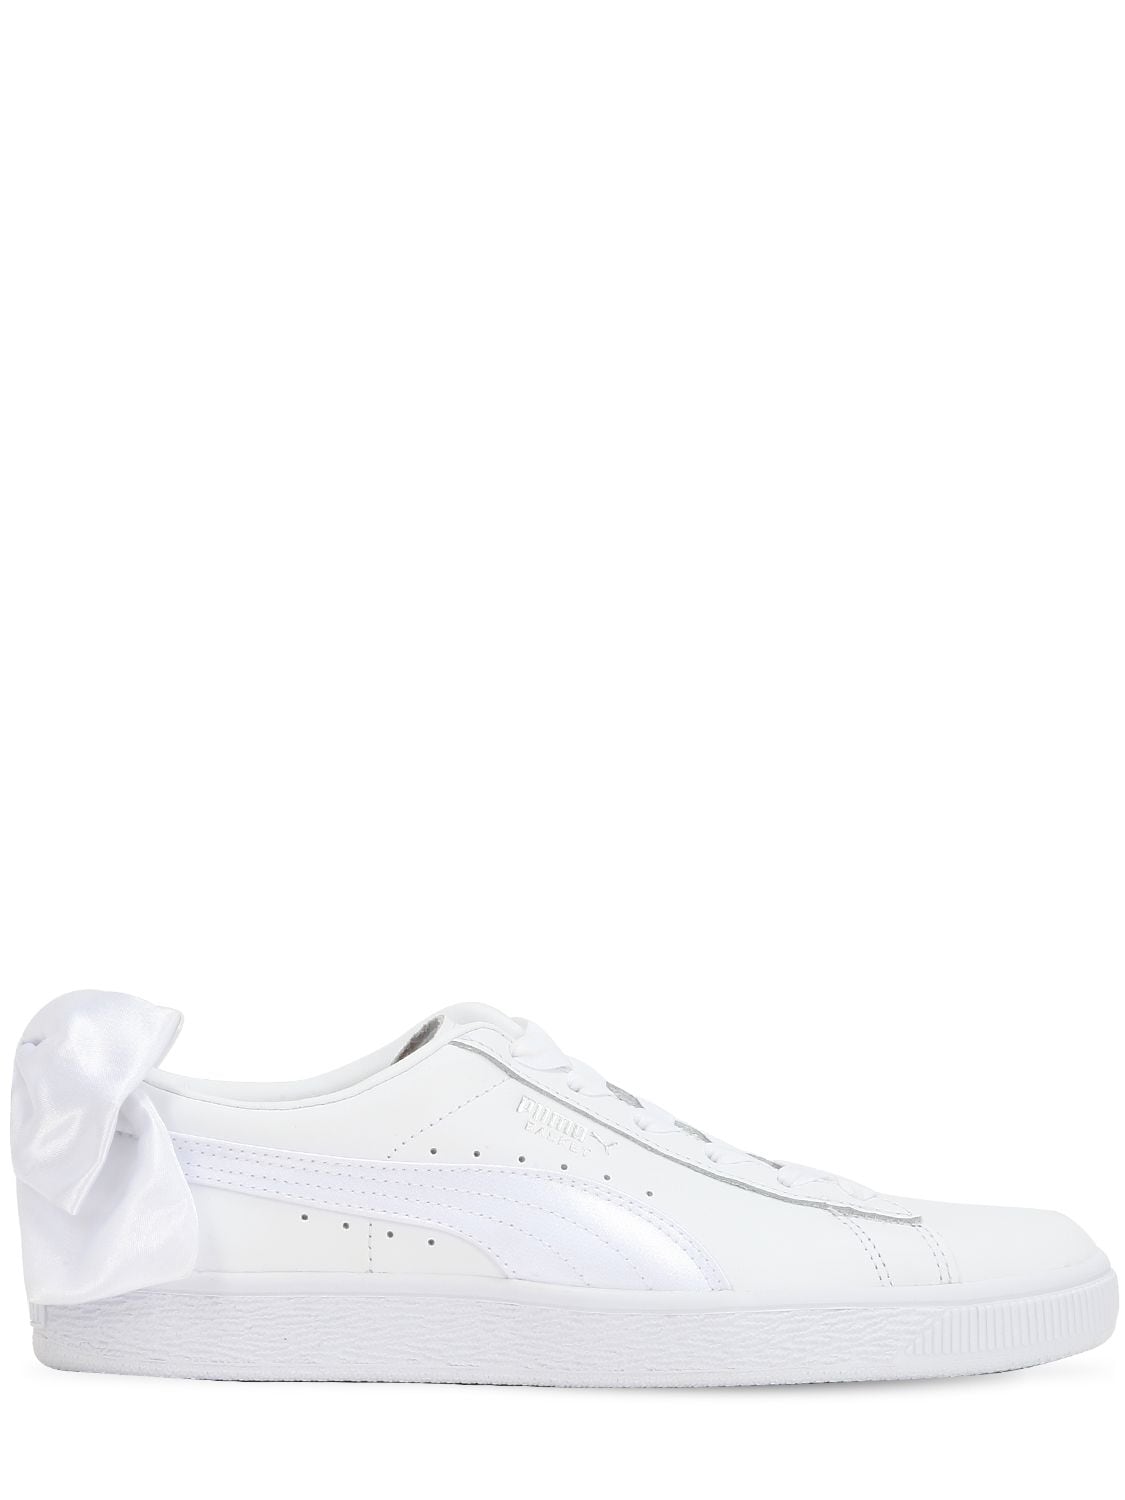 Puma Basket Bow Leather Sneakers In White